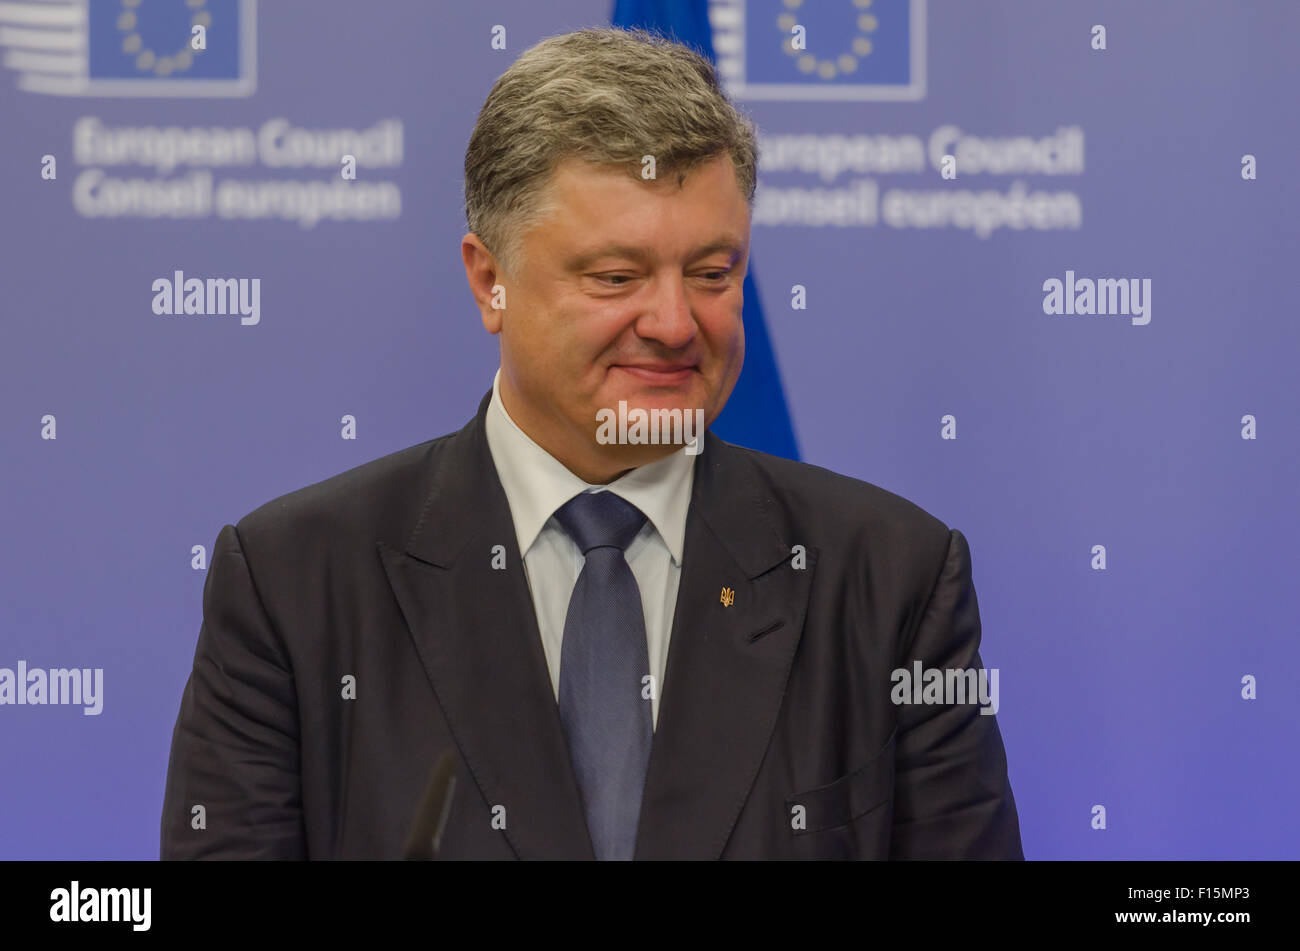 Belgium. 27th Aug, 2015. President of Ukraine Petro Poroshenko talks to the Media, after his visit to the European Council headquarters. the meeting will be the opportunity to follow the discussions held during the year on the crisis in Eastern Ukraine. © Jonathan Raa/Pacific Press/Alamy Live News Stock Photo